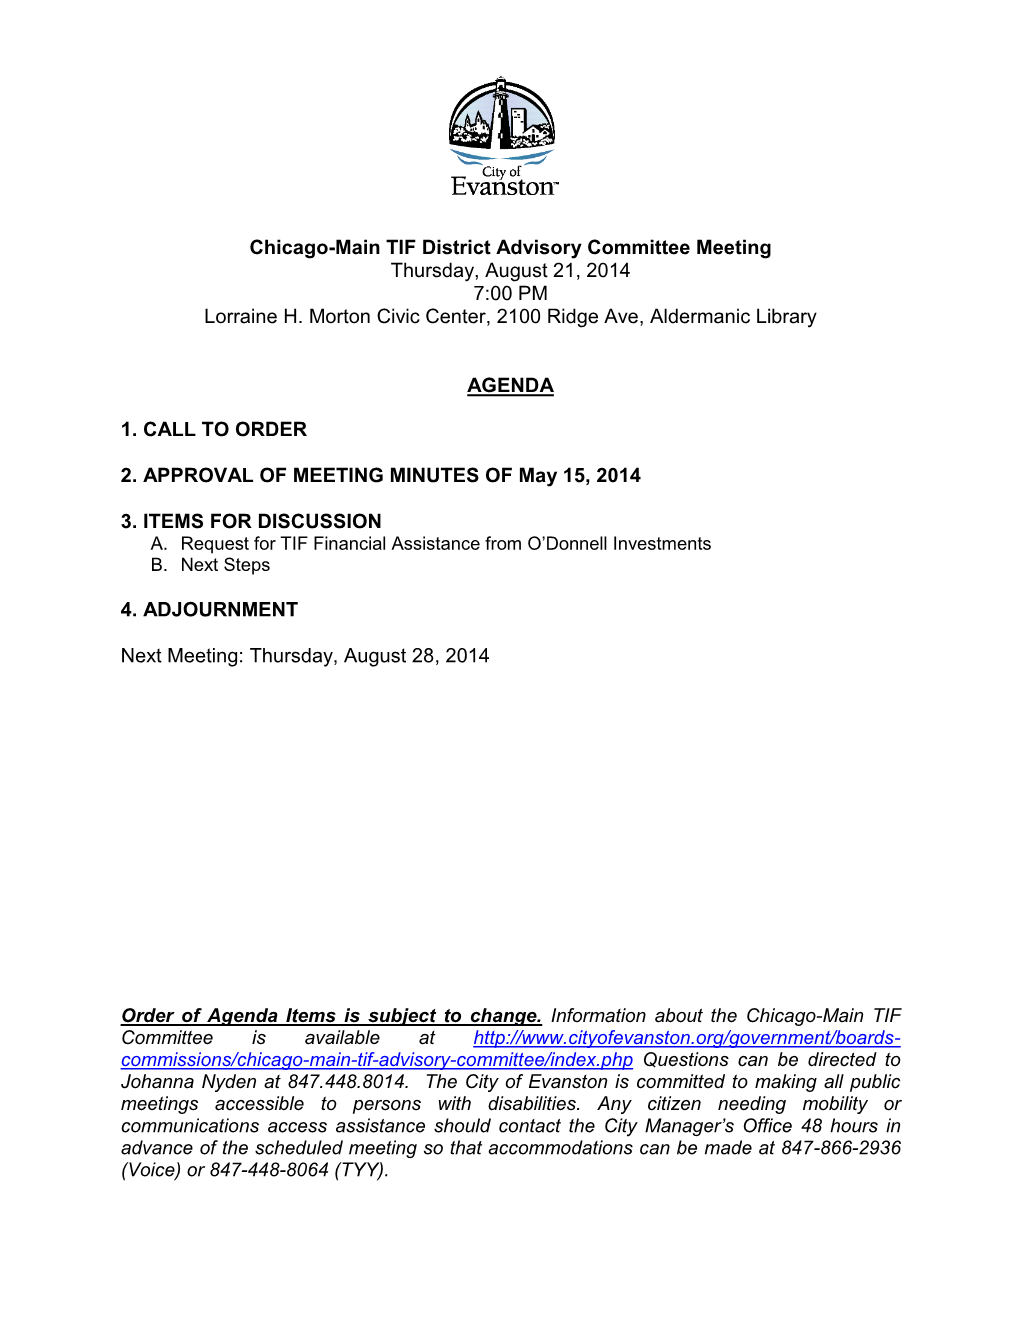 Chicago-Main TIF District Advisory Committee Meeting Thursday, August 21, 2014 7:00 PM Lorraine H